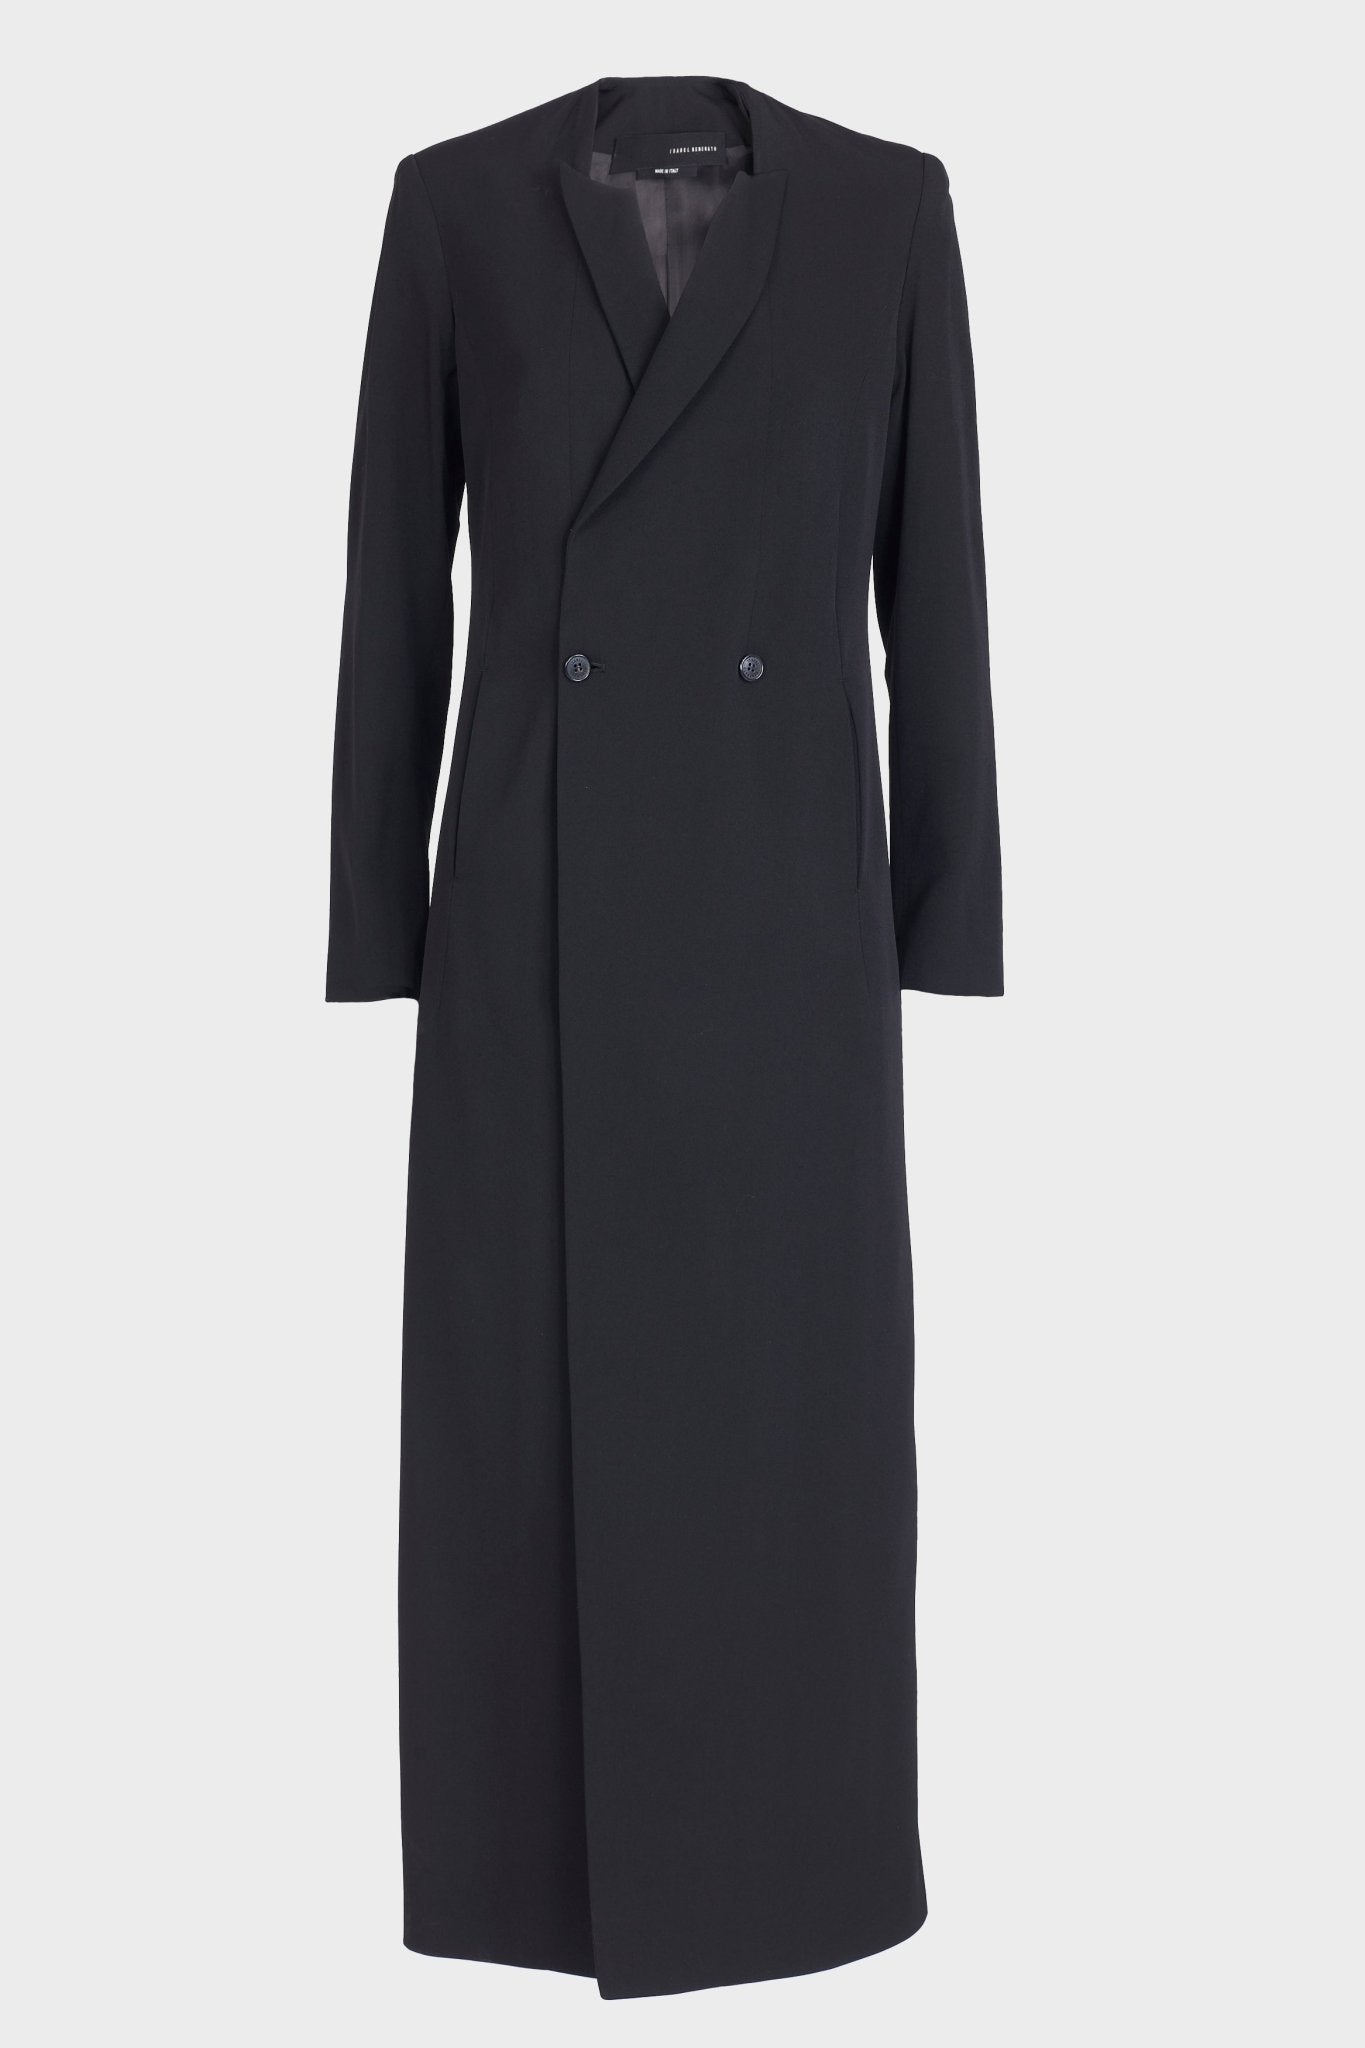 Wool and Viscose Double Breast Long Coat - thegreatputonmvWool and Viscose Double Breast Long CoatWool and Viscose Double Breast Long CoatWool and Viscose Double Breast Long CoatWOMEN'S JACKETSISABEL BENENATOthegreatputonmvDW01F24 -1Wool and Viscose Double Breast Long CoatBLACK 0142